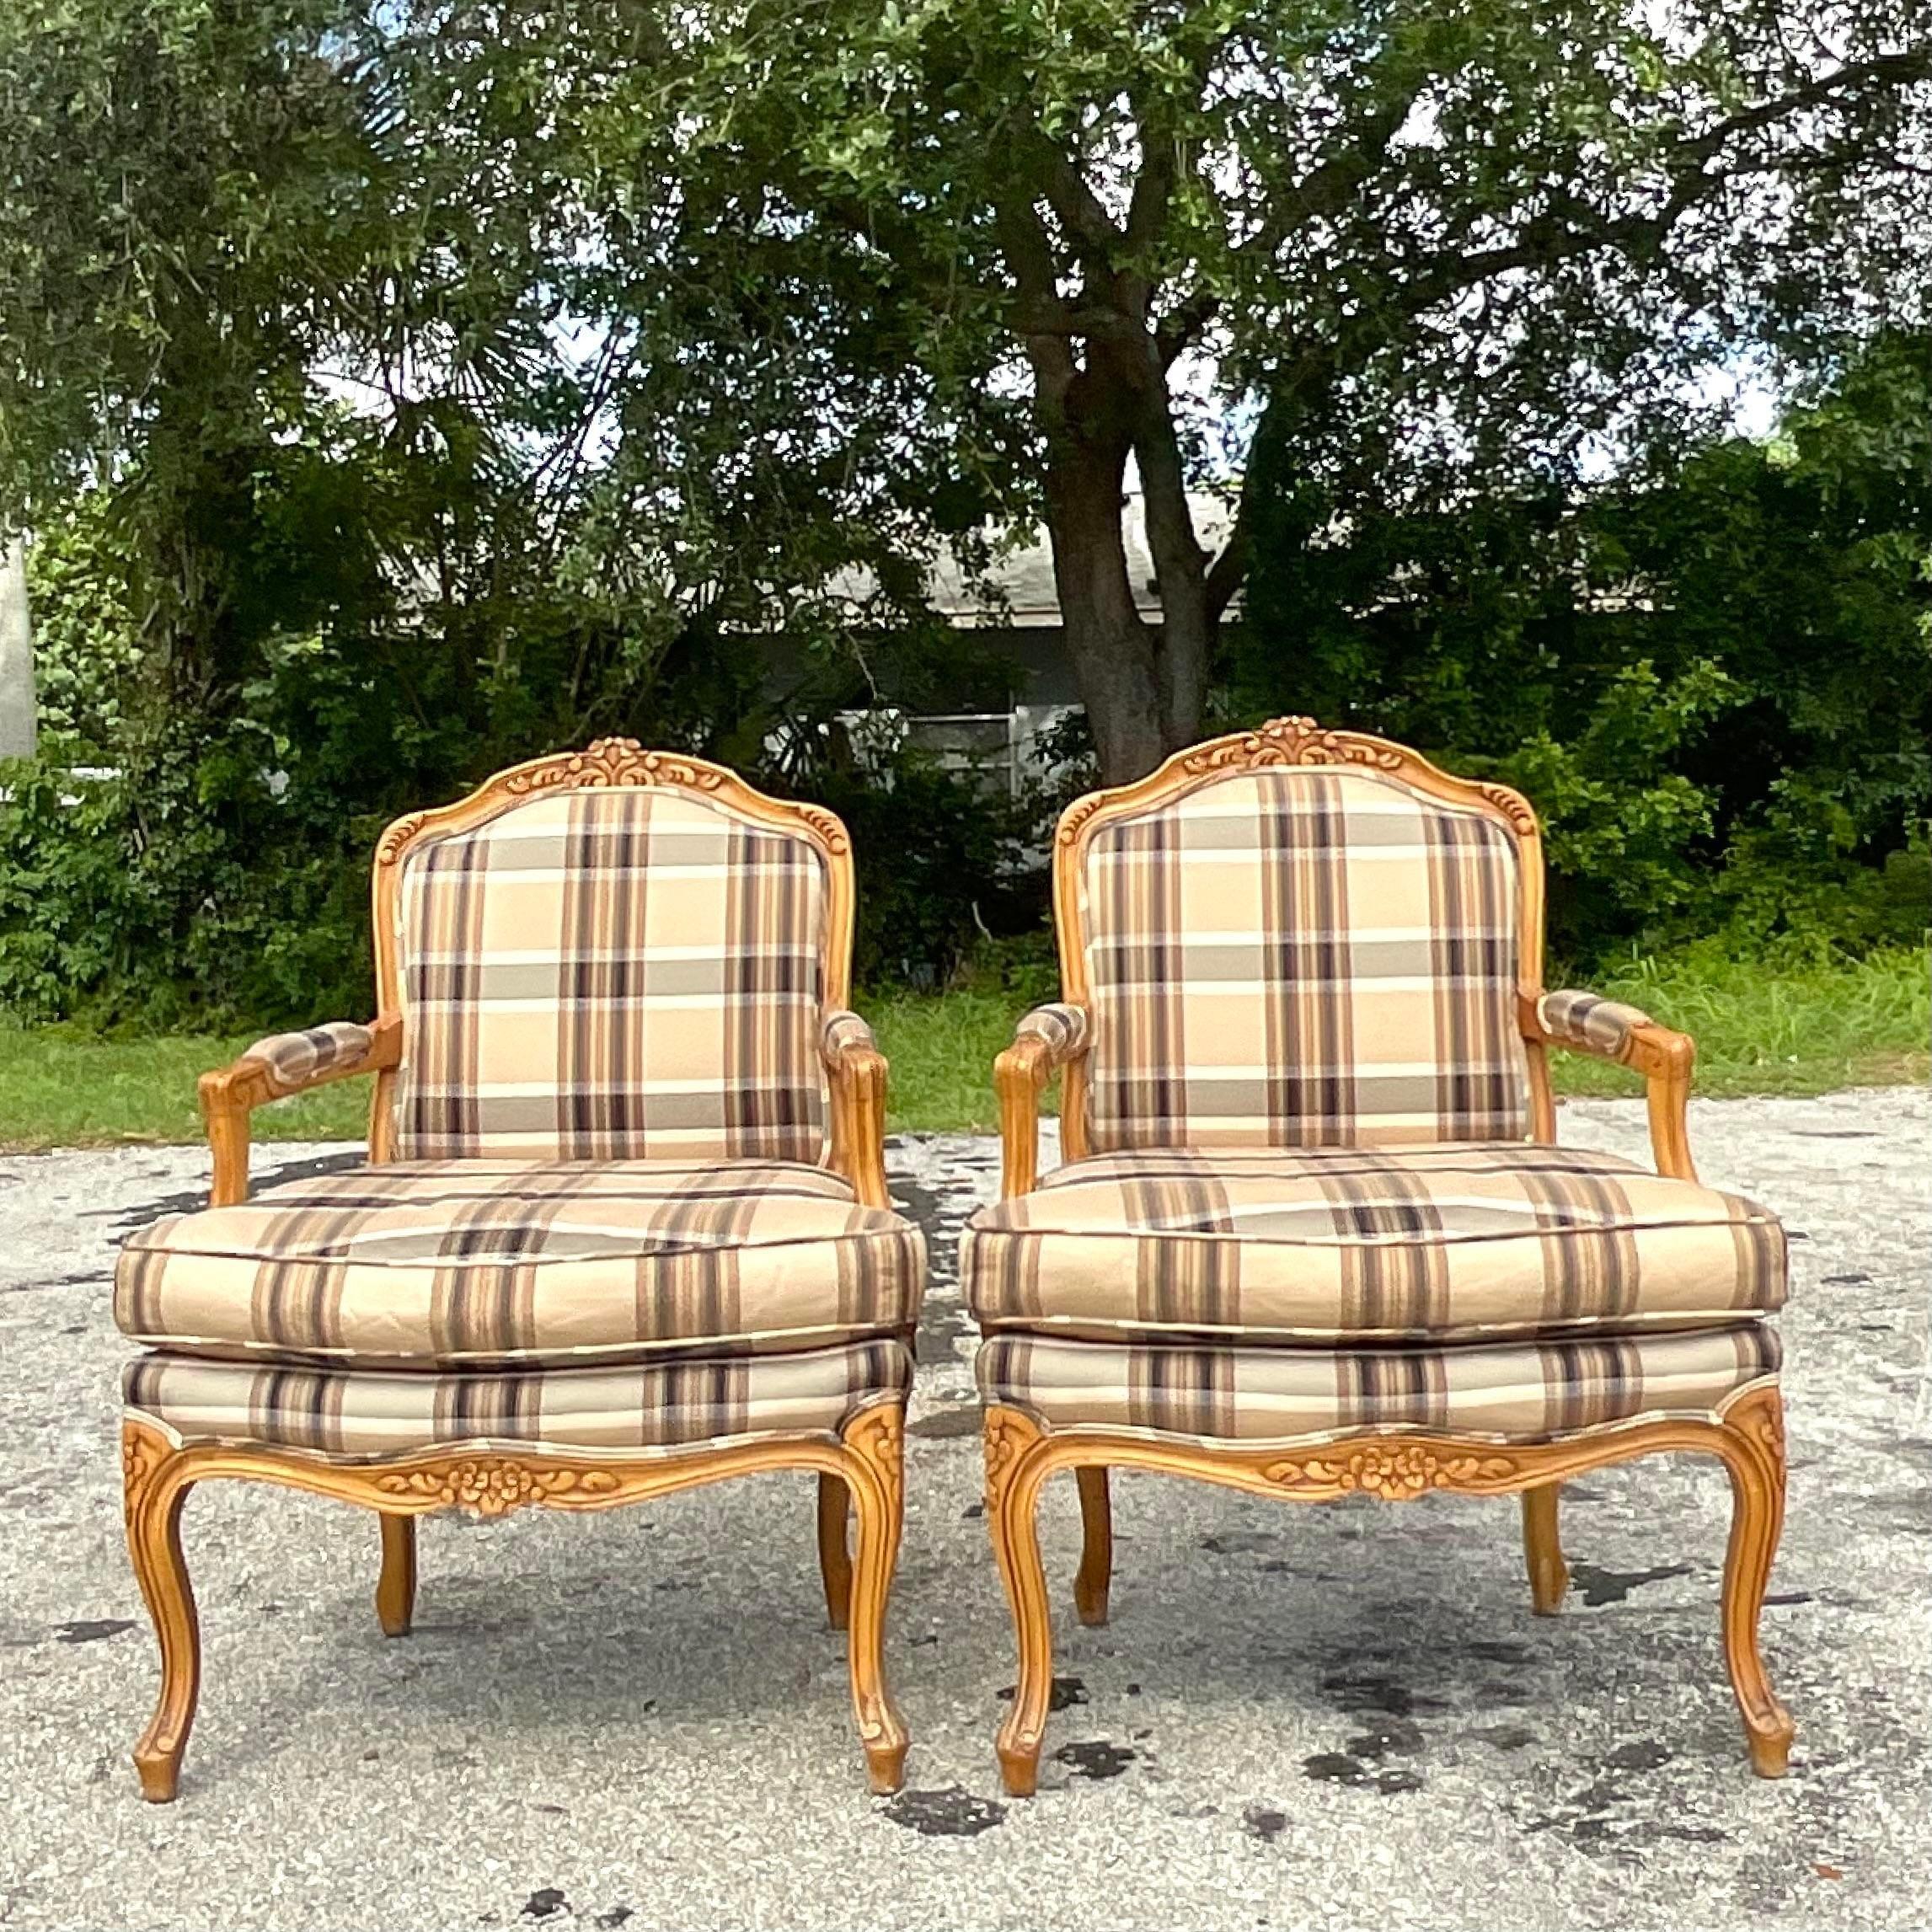 Philippine Vintage Regency Baker Furniture Bergere Chairs - a Pair